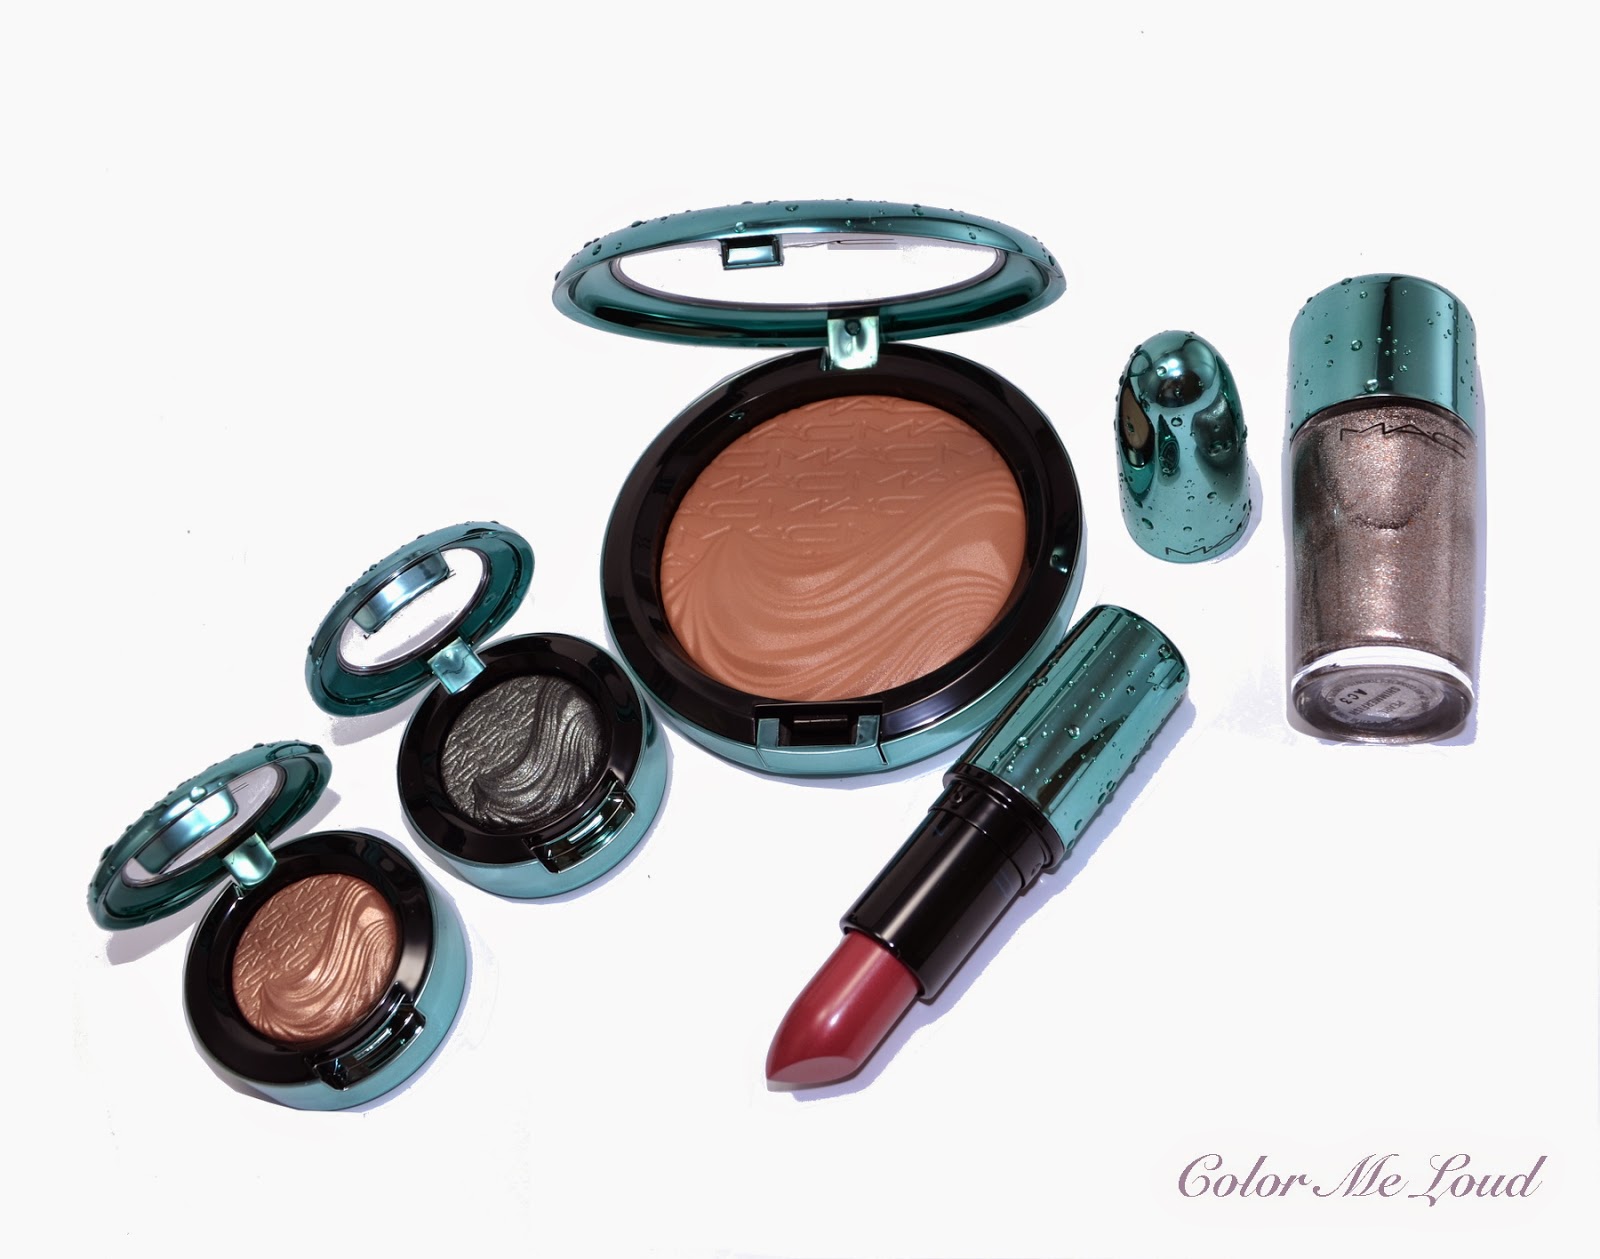 MAC Alluring Aquatic Collection, My Picks Part II, Swatches, Review & FOTD, Extra Dimension Bronzer in Aphrodite's Shell, Lipstick in Mystical, Eye Shadows Lorelei, Legendary Lure and Nail Polish Shimmerfish